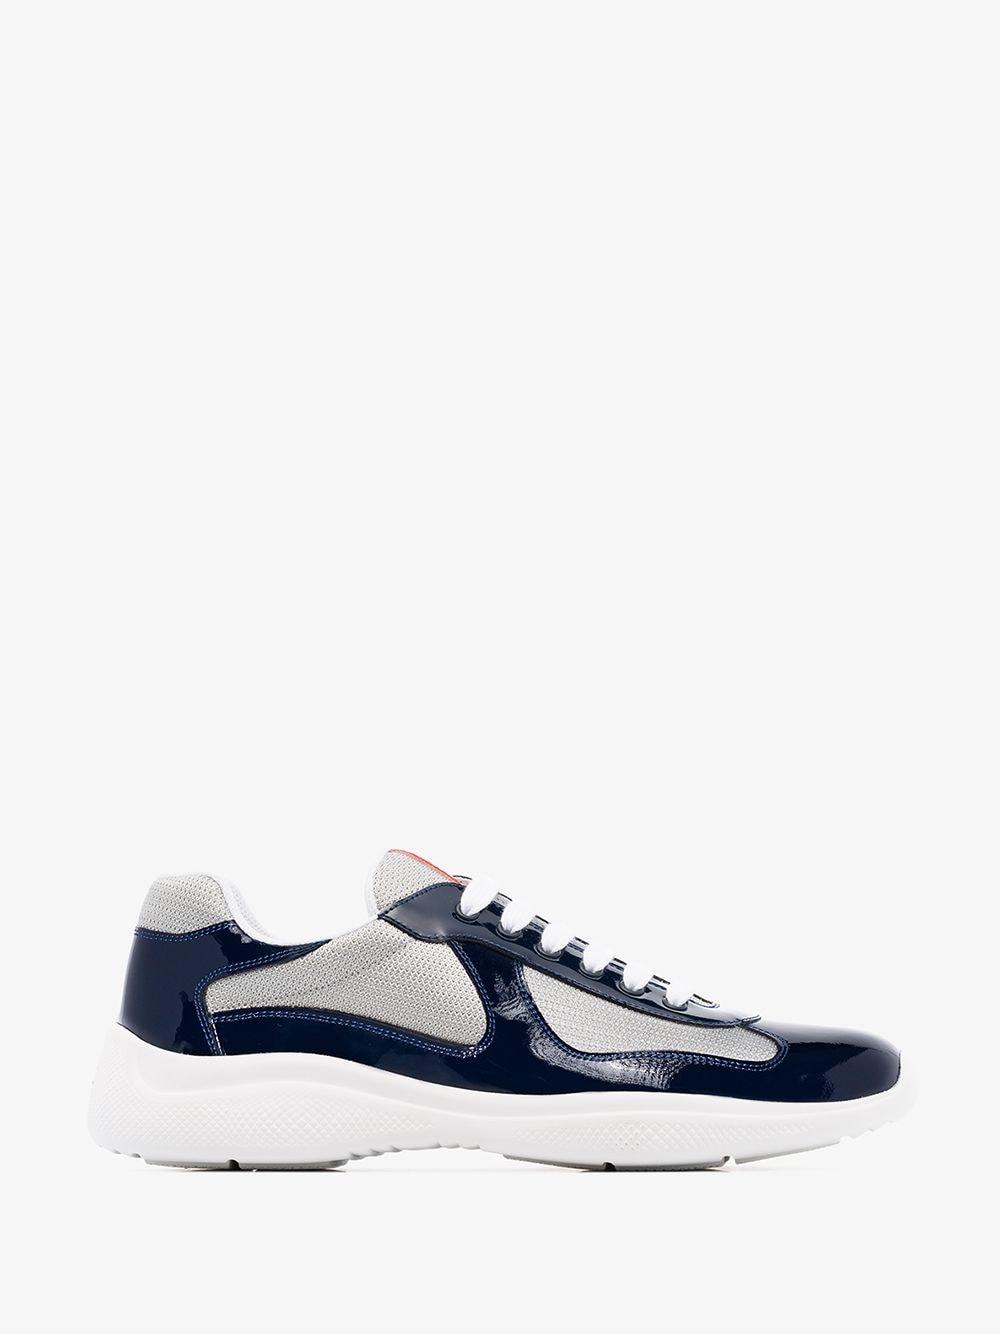 Prada Leather Technical Fabric Sneakers in Navy (Blue) for Men - Save 55% -  Lyst